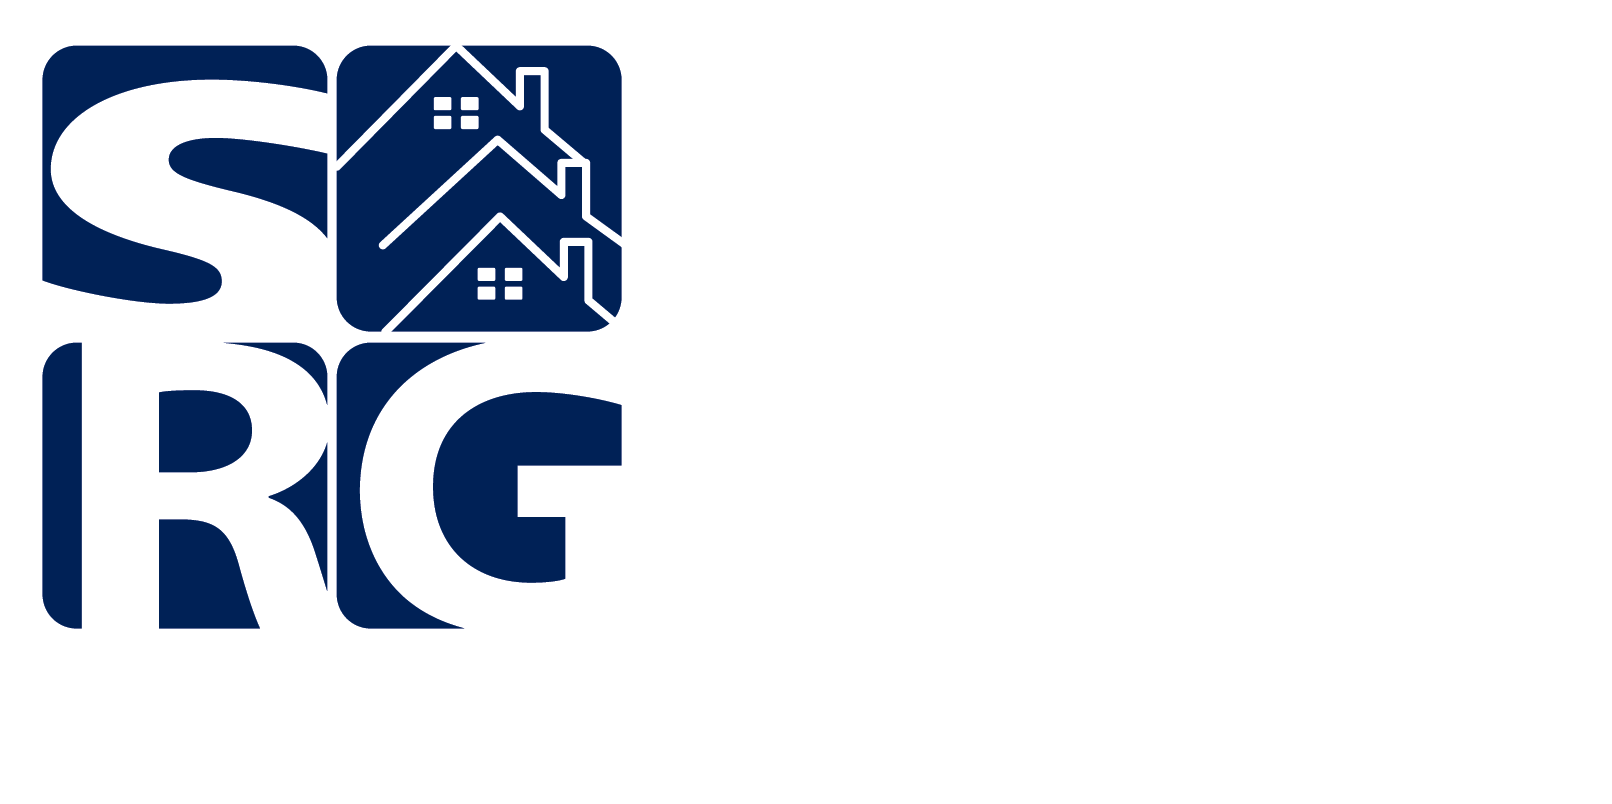 Real Estate in Cary, Raleigh and Surrounding Areas